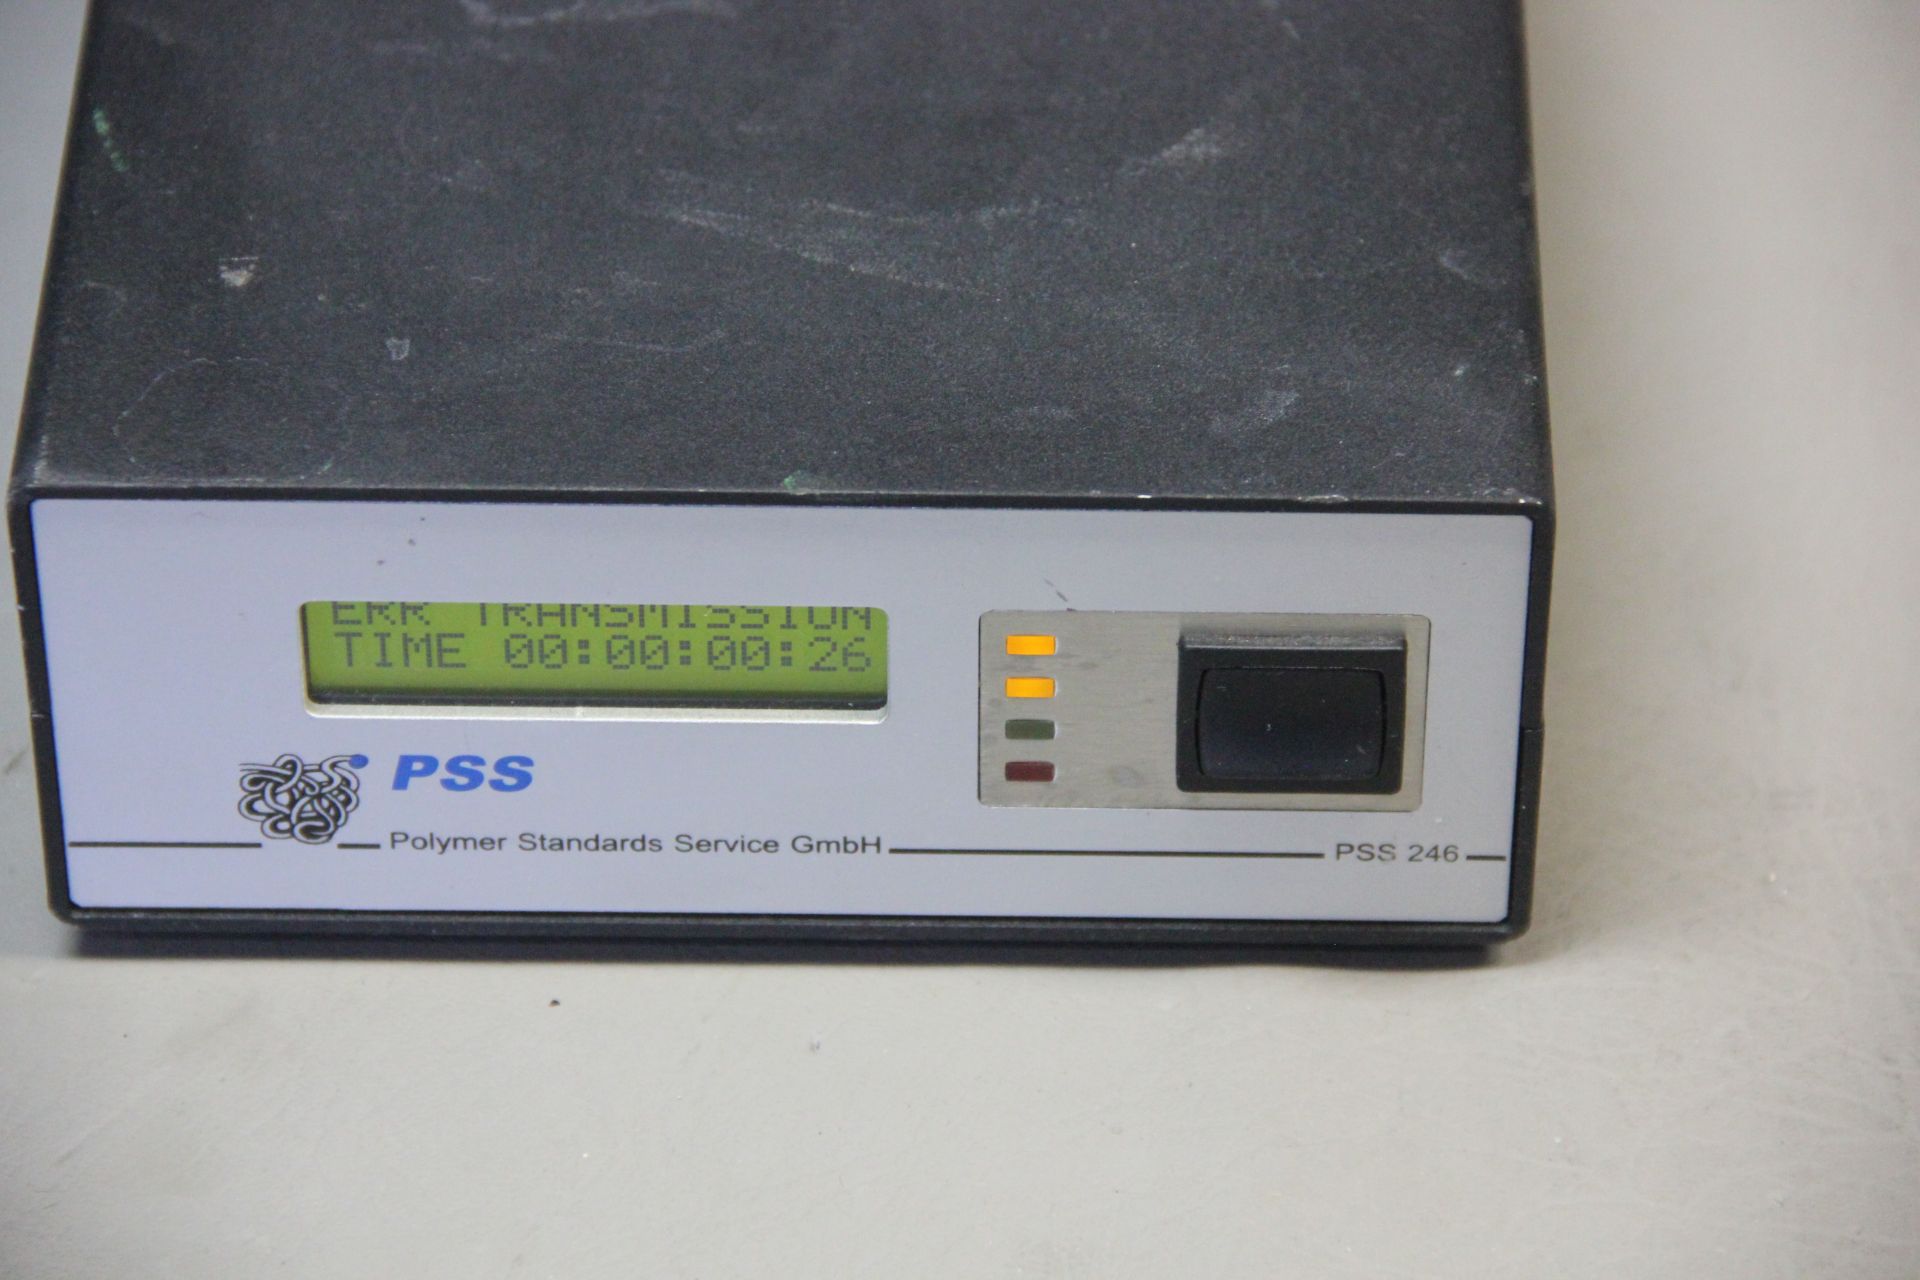 PSS/AGILENT POLYMER STANDARDS SERVICE CONTROL UNIT - Image 5 of 7